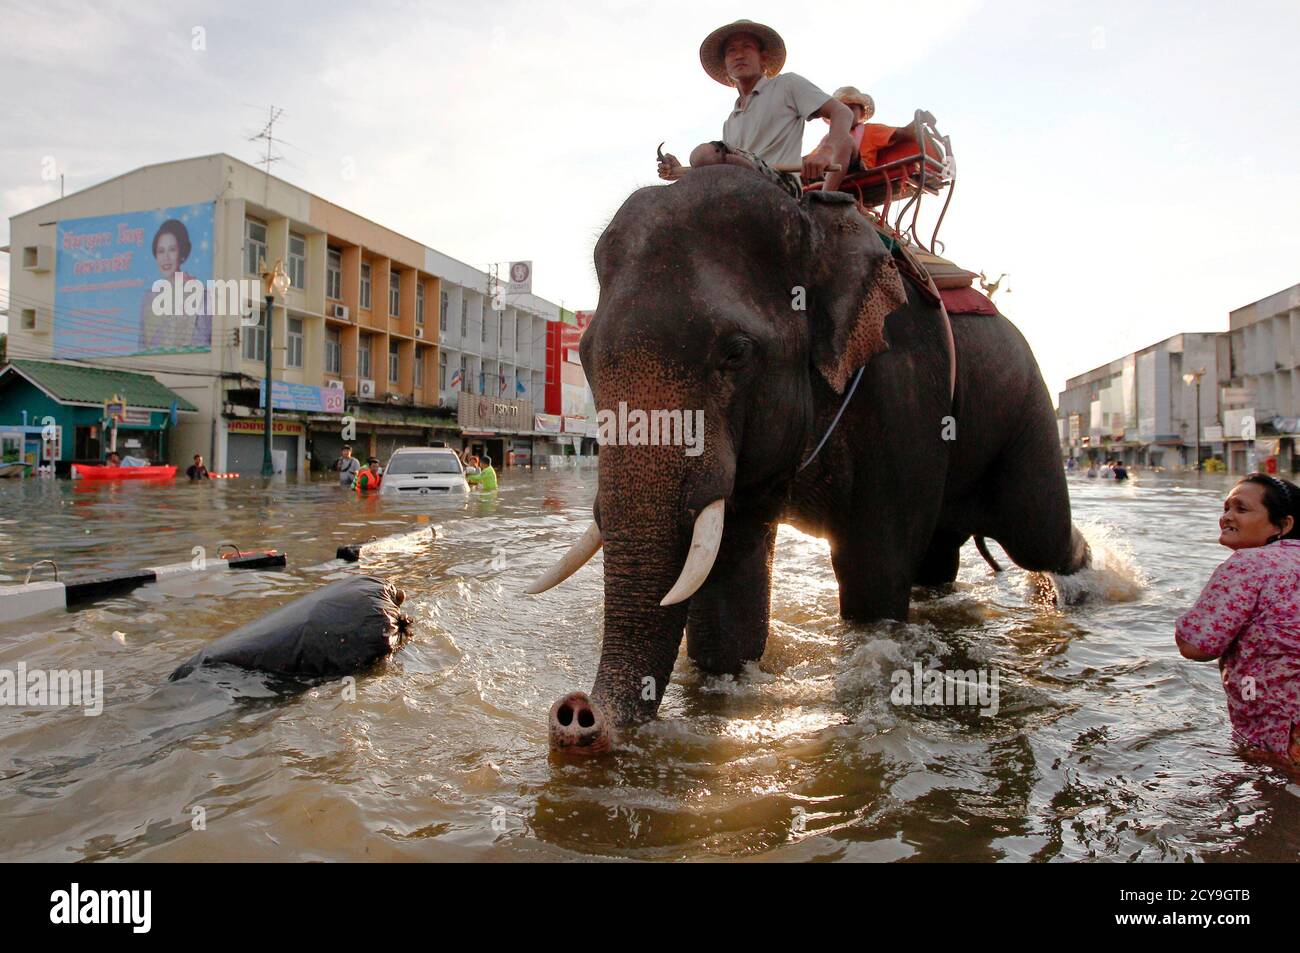 An elephant helps people moving with their belongings through a flooded area in Ayutthaya province October 8, 2011. Thailand has been hit by massive flooding caused by a tropical storm followed by seasonal monsoon rains, which usually fall from August to October. At least 244 people have been killed in floods in Thailand since mid-July, the Department of Disaster Prevention and Mitigation said.    REUTERS/Sukree Sukplang (THAILAND - Tags: ANIMALS ENVIRONMENT TPX IMAGES OF THE DAY) FOR BEST QUALITY IMAGE: ALSO SEE GM1E7AI15ZO01. Stock Photo